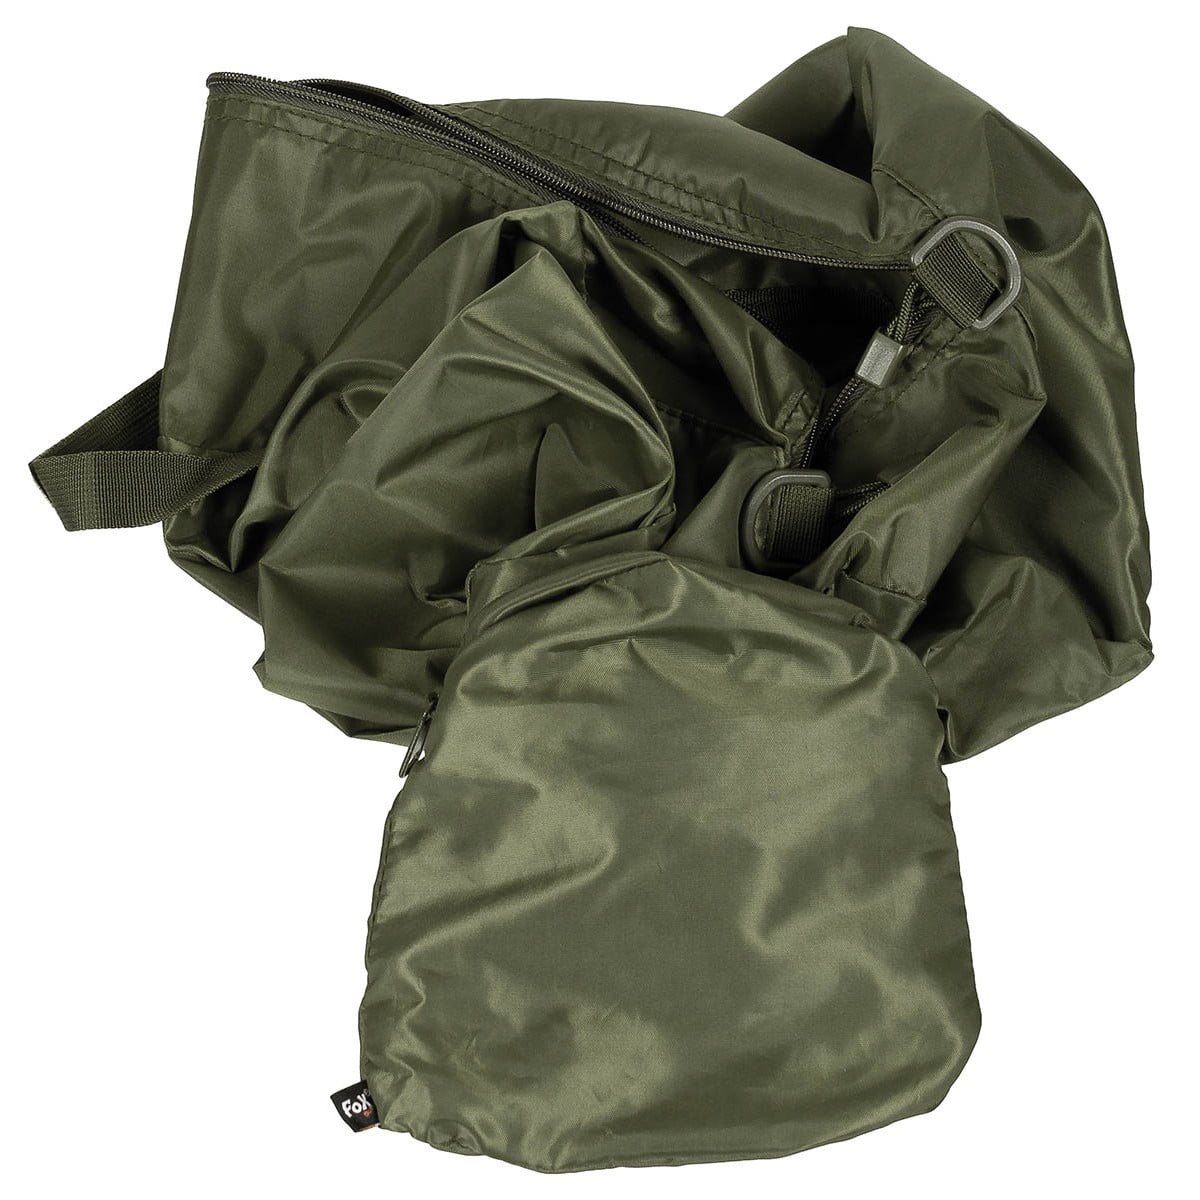 MFH int. comp. Light and collapsible transport bag OLIV | MILITARY RANGE